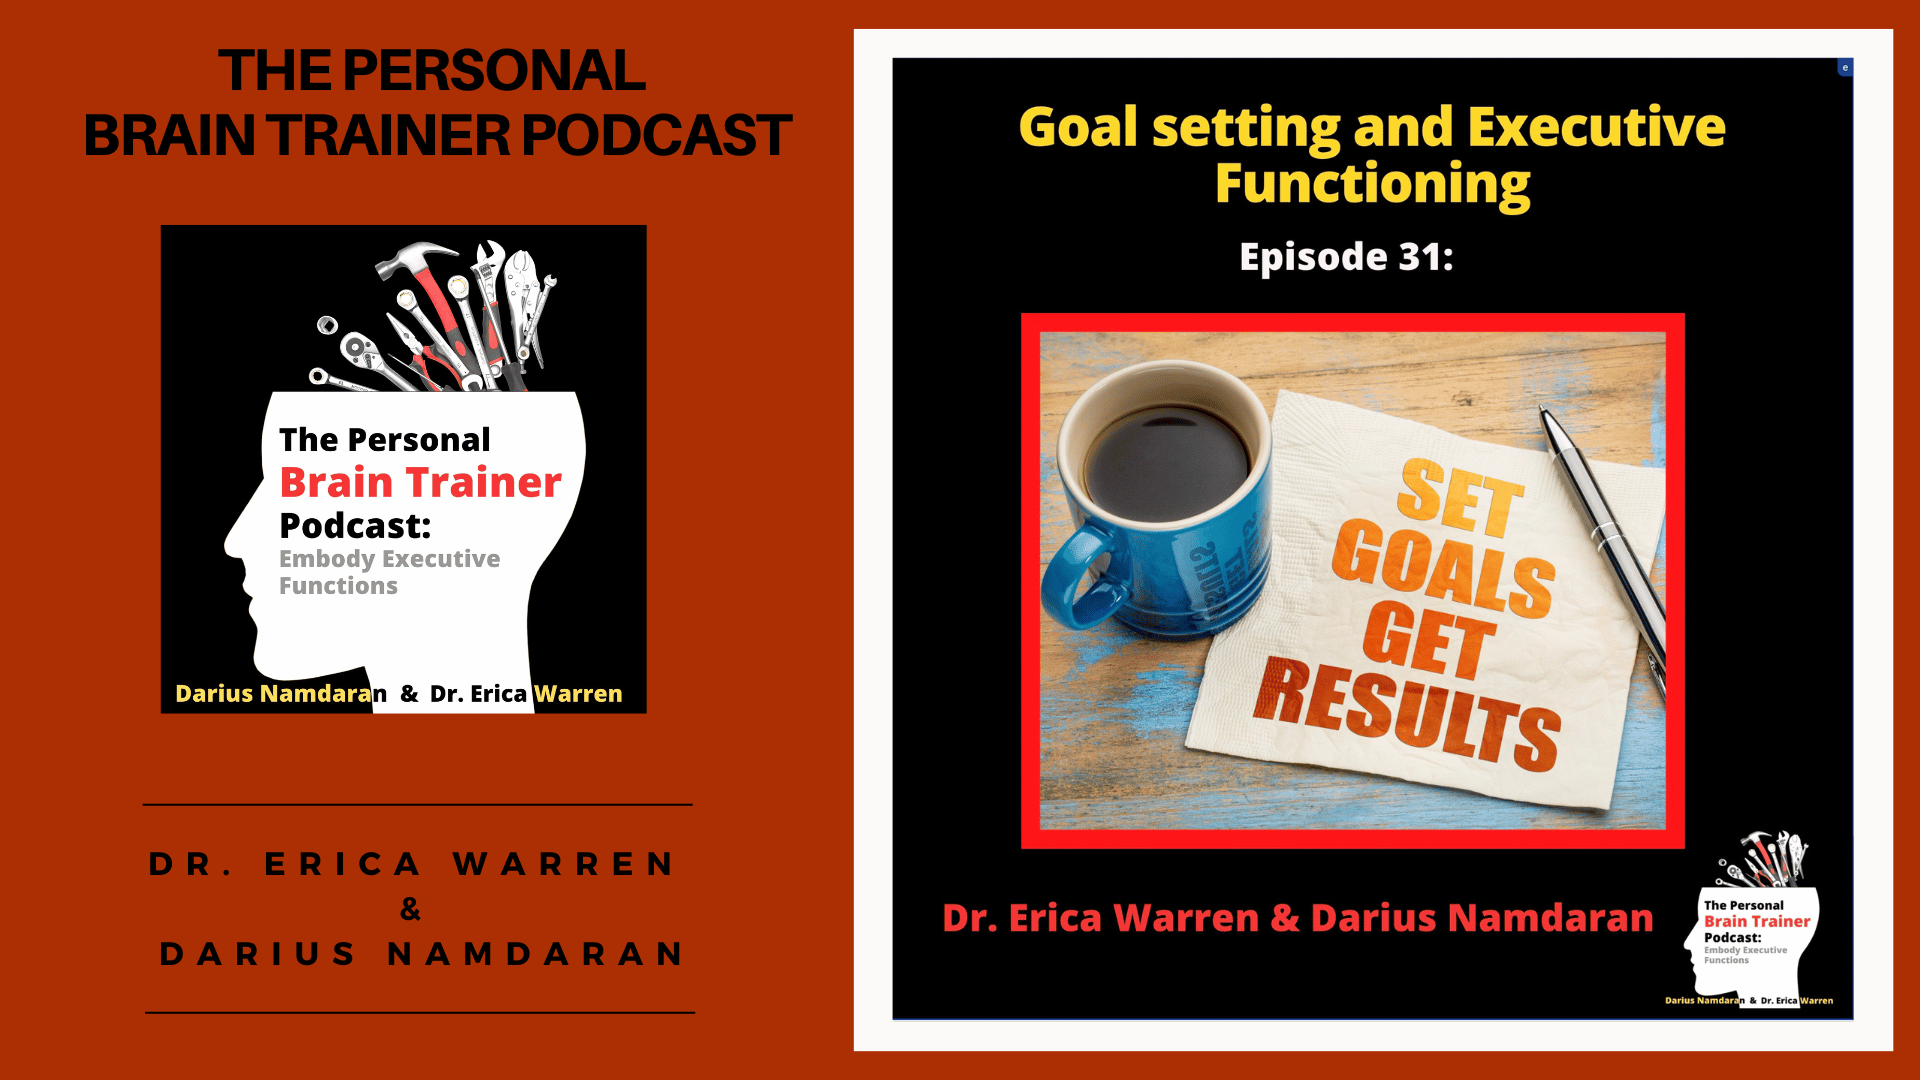 Goal setting and executive functioning